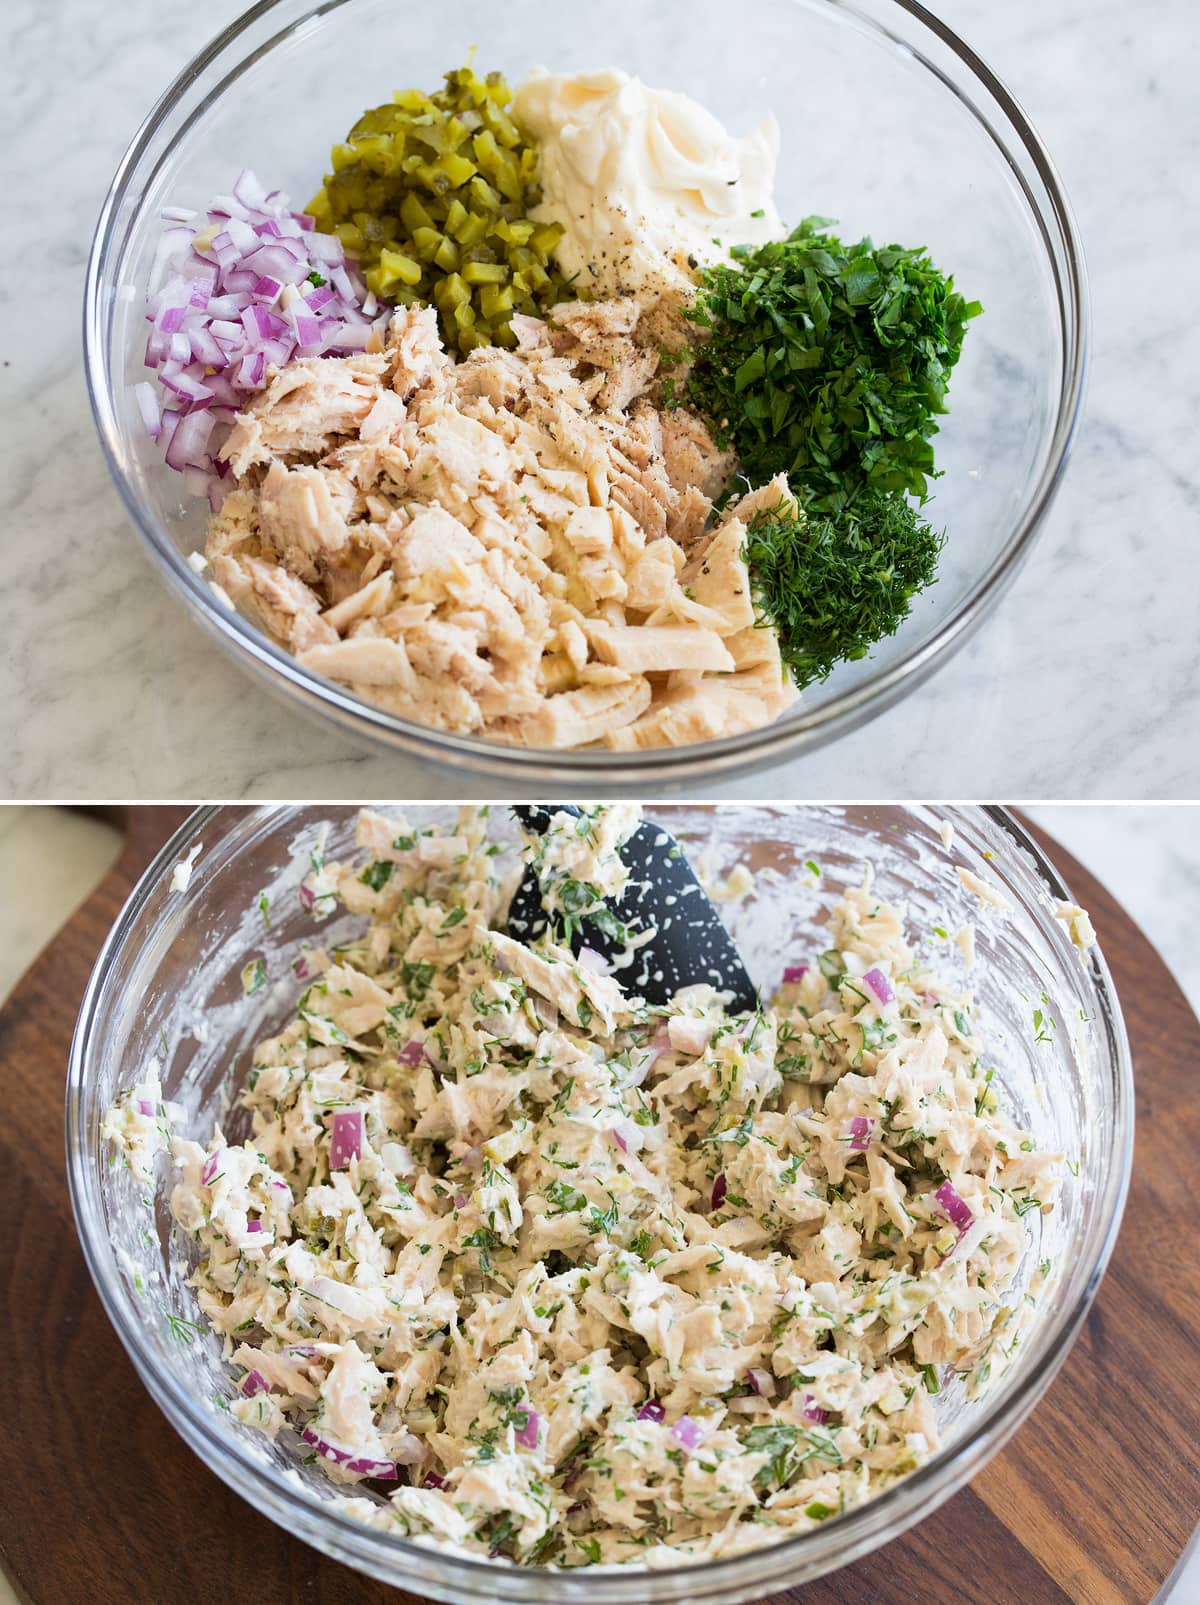 Tuna salad before and after mixing in a mixing bowl.